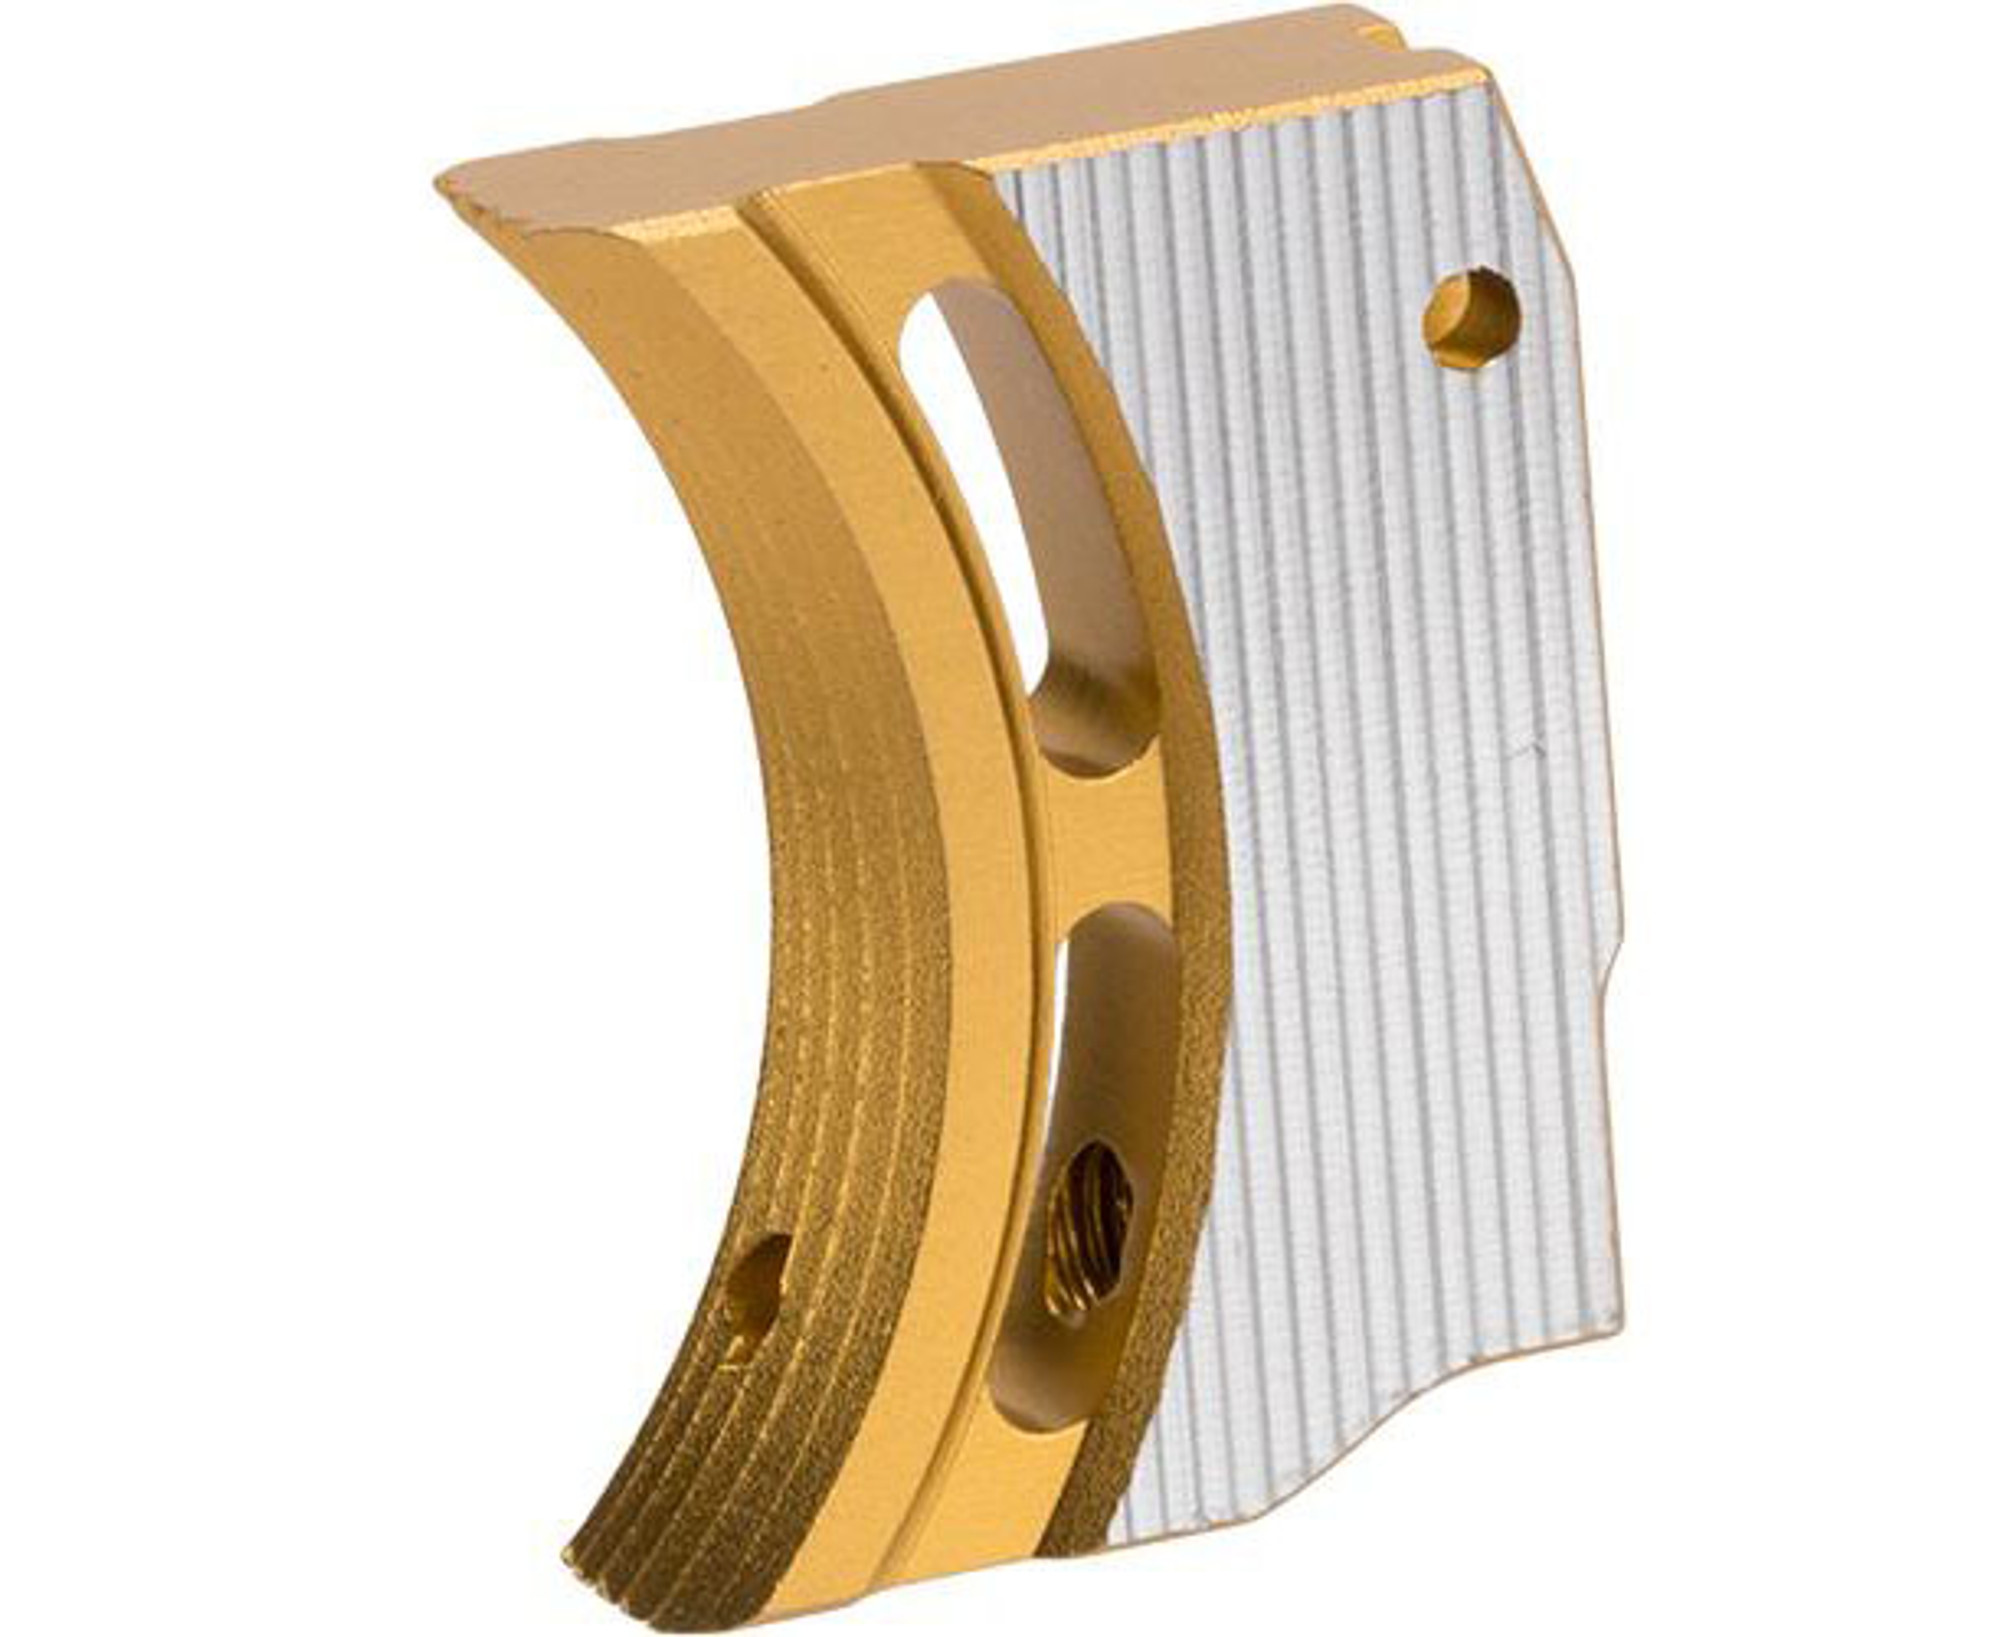 Airsoft Masterpiece Aluminum Trigger - Type 1 (Color: Gold Two-Tone)